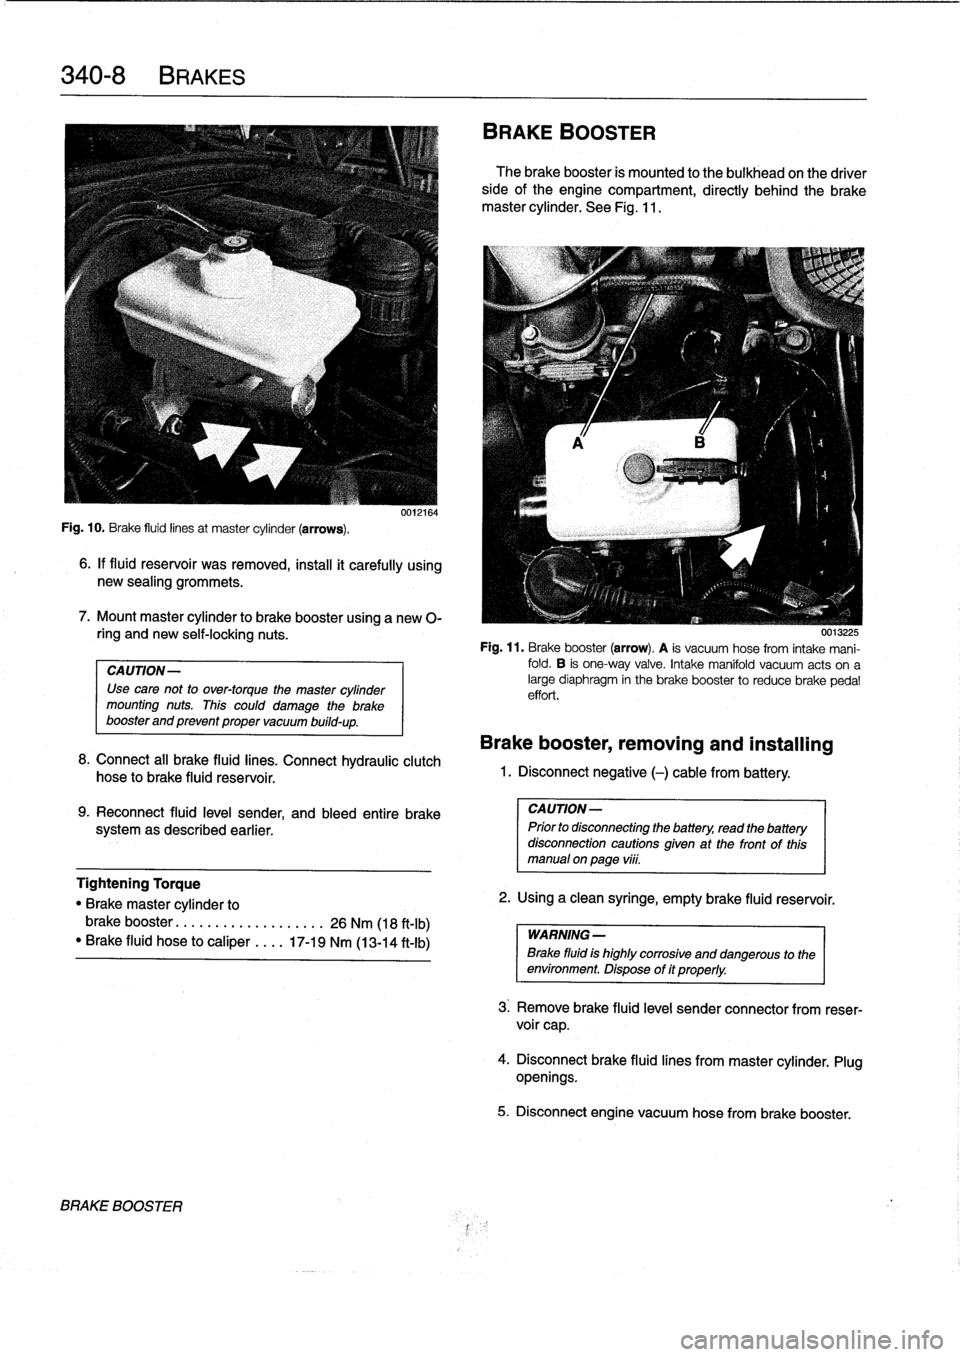 BMW 323i 1993 E36 Owners Guide 
340-
8
BRAKES

Fig
.
10
.
Brake
fluid
linesat
master
cylinder
(arrows)
.

6
.
If
fluid
reservoir
was
removed,
install
it
carefully
using
new
sealing
grommets
.

7
.
Mount
master
cylinder
to
brake
boo